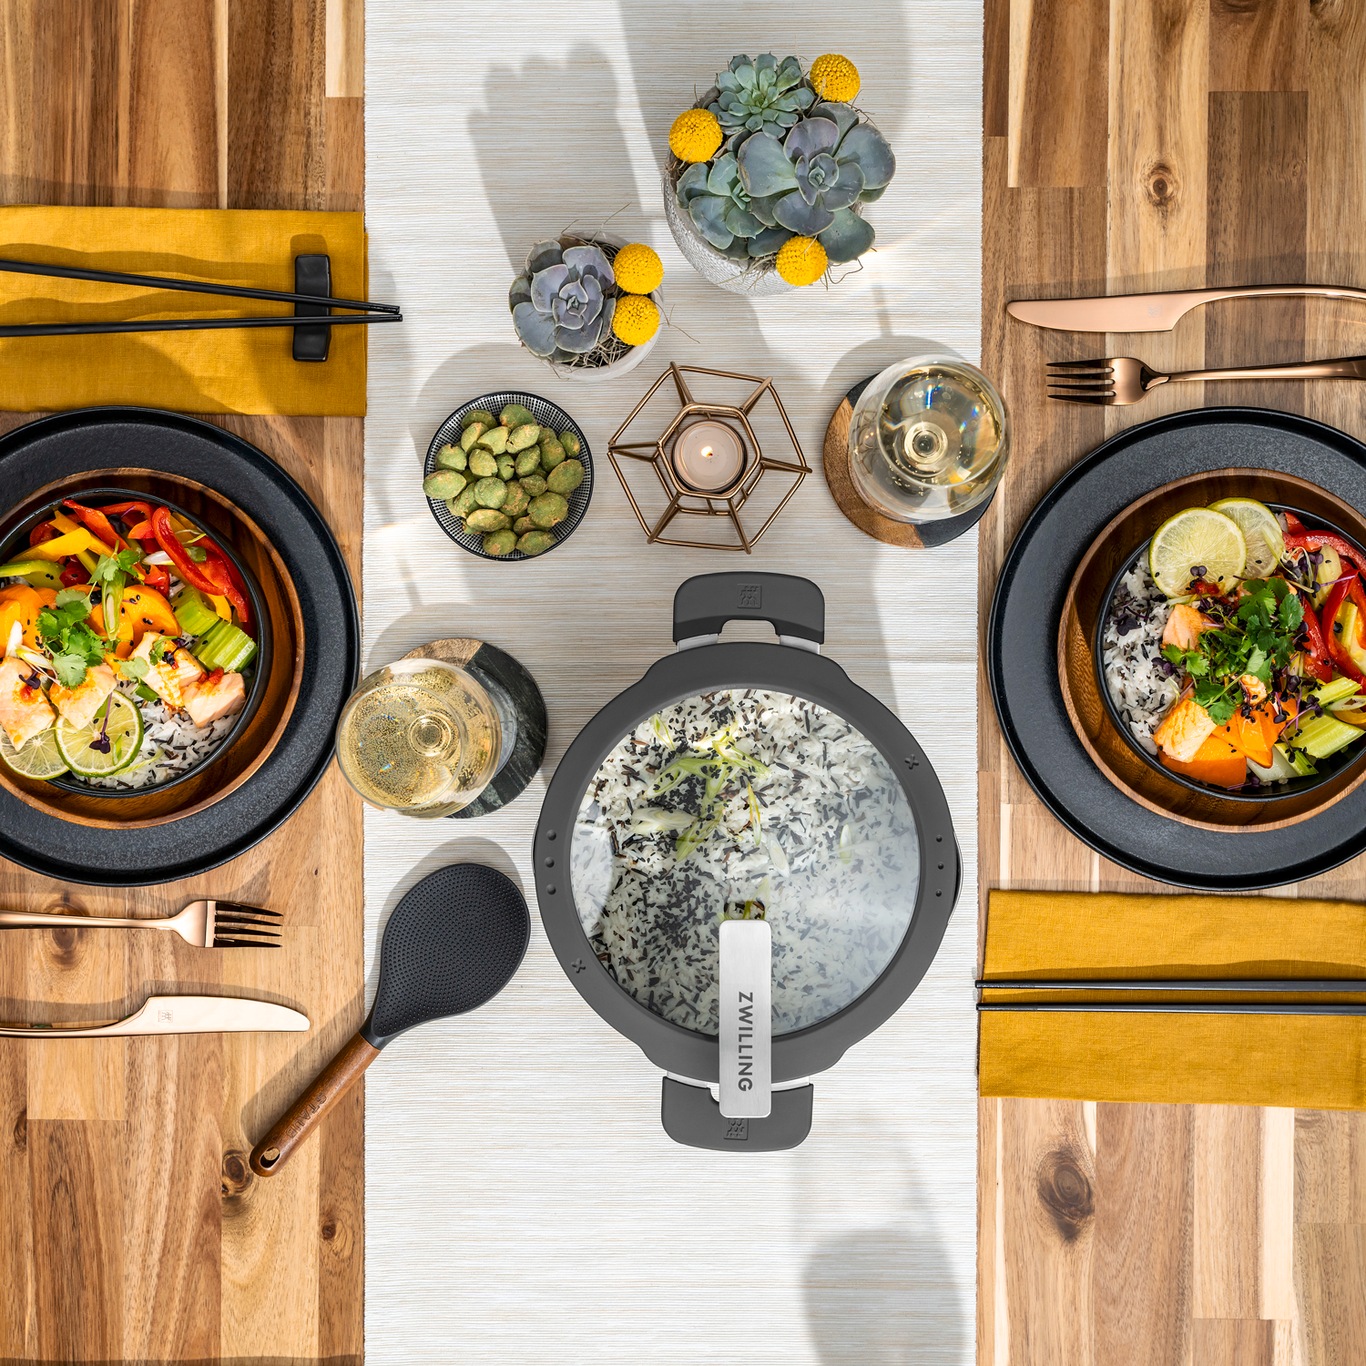 Jamie Oliver Cook's Classic Pot Set Stainless Steel 7 Pieces - Tefal @  RoyalDesign